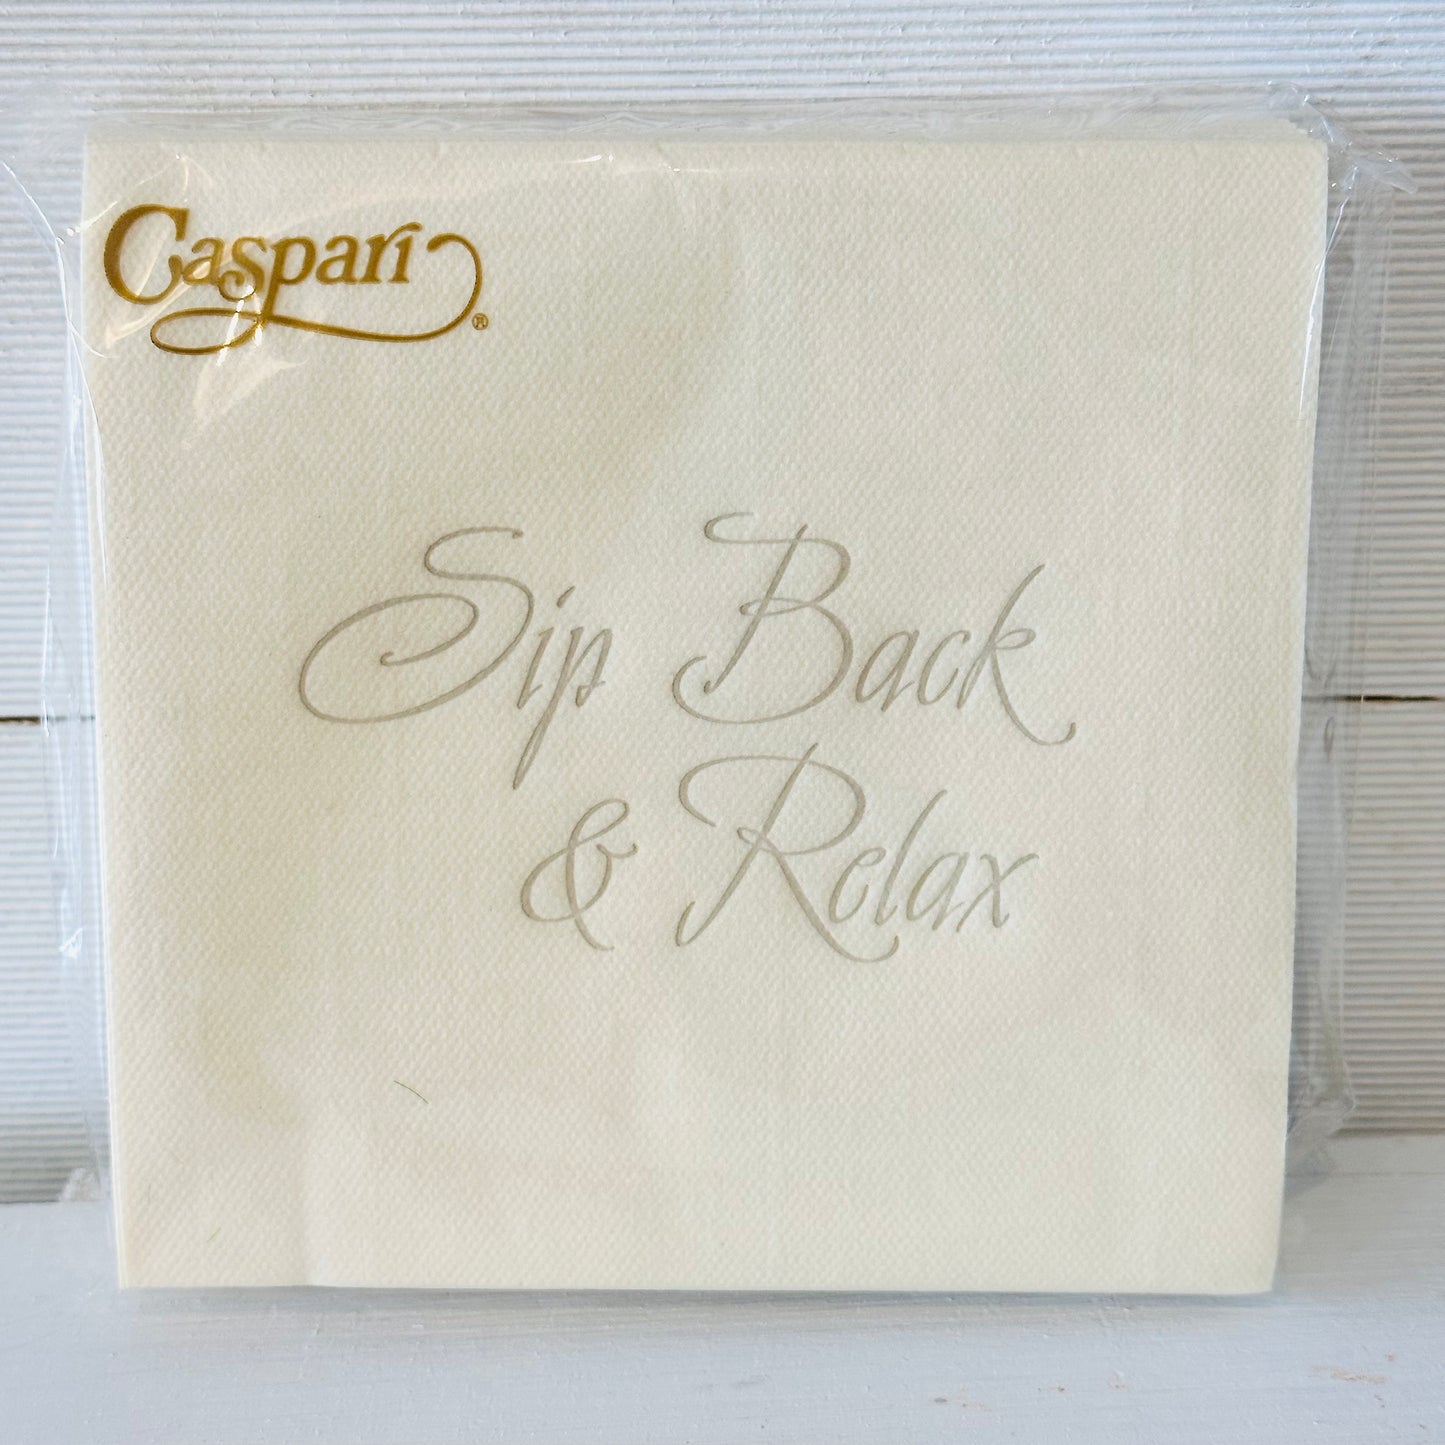 Sip Back Relax Napkin